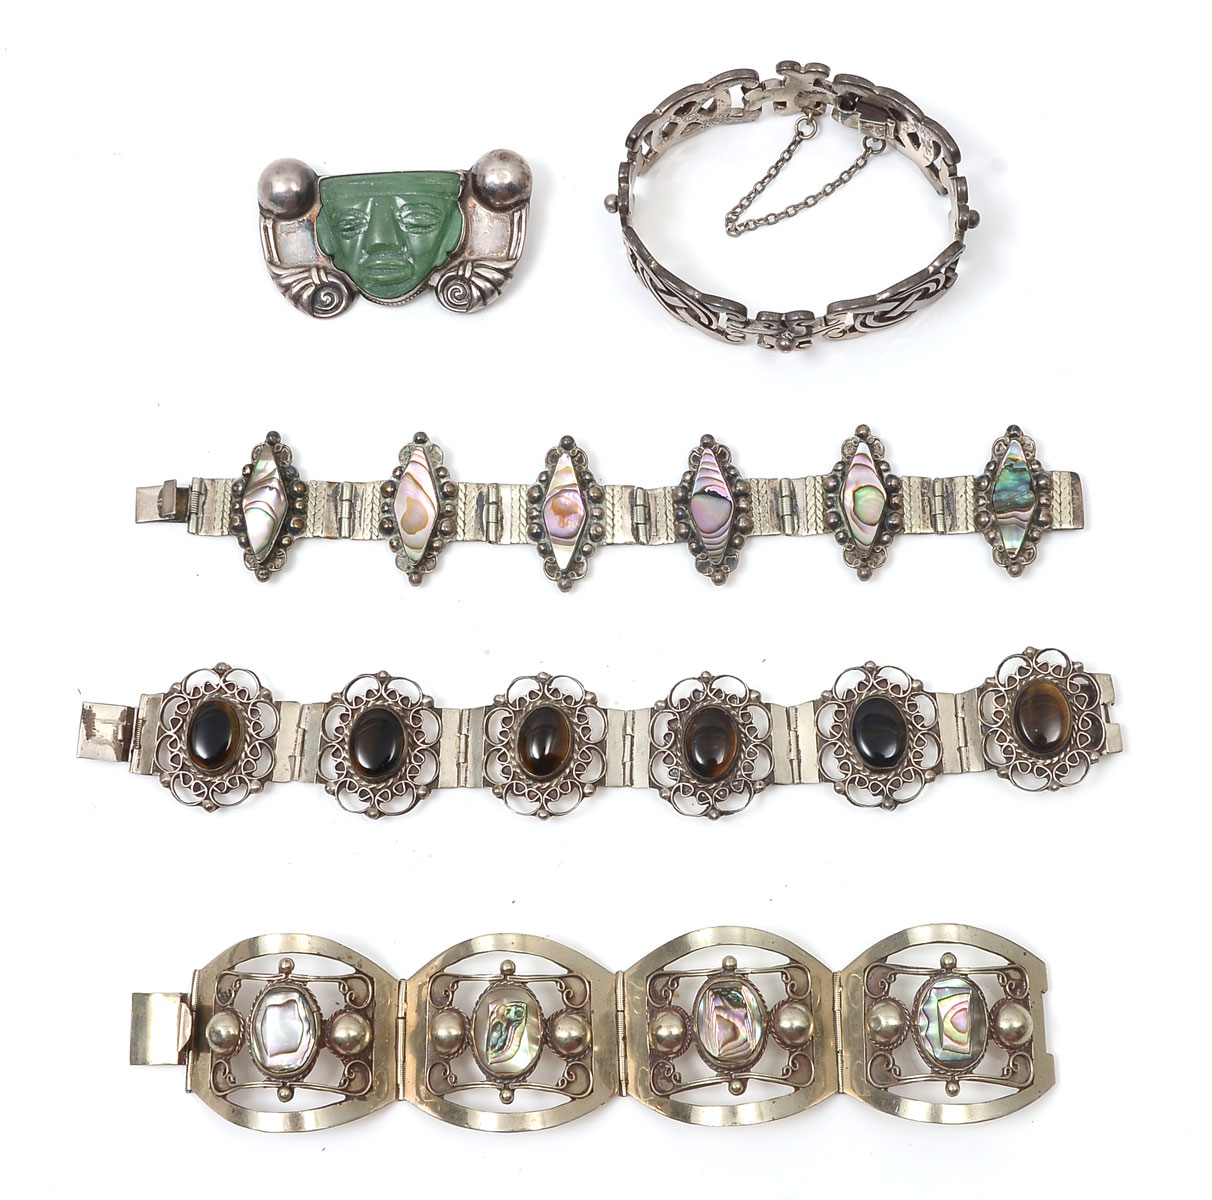 5 PIECE MEXICAN STERLING JEWELRY: